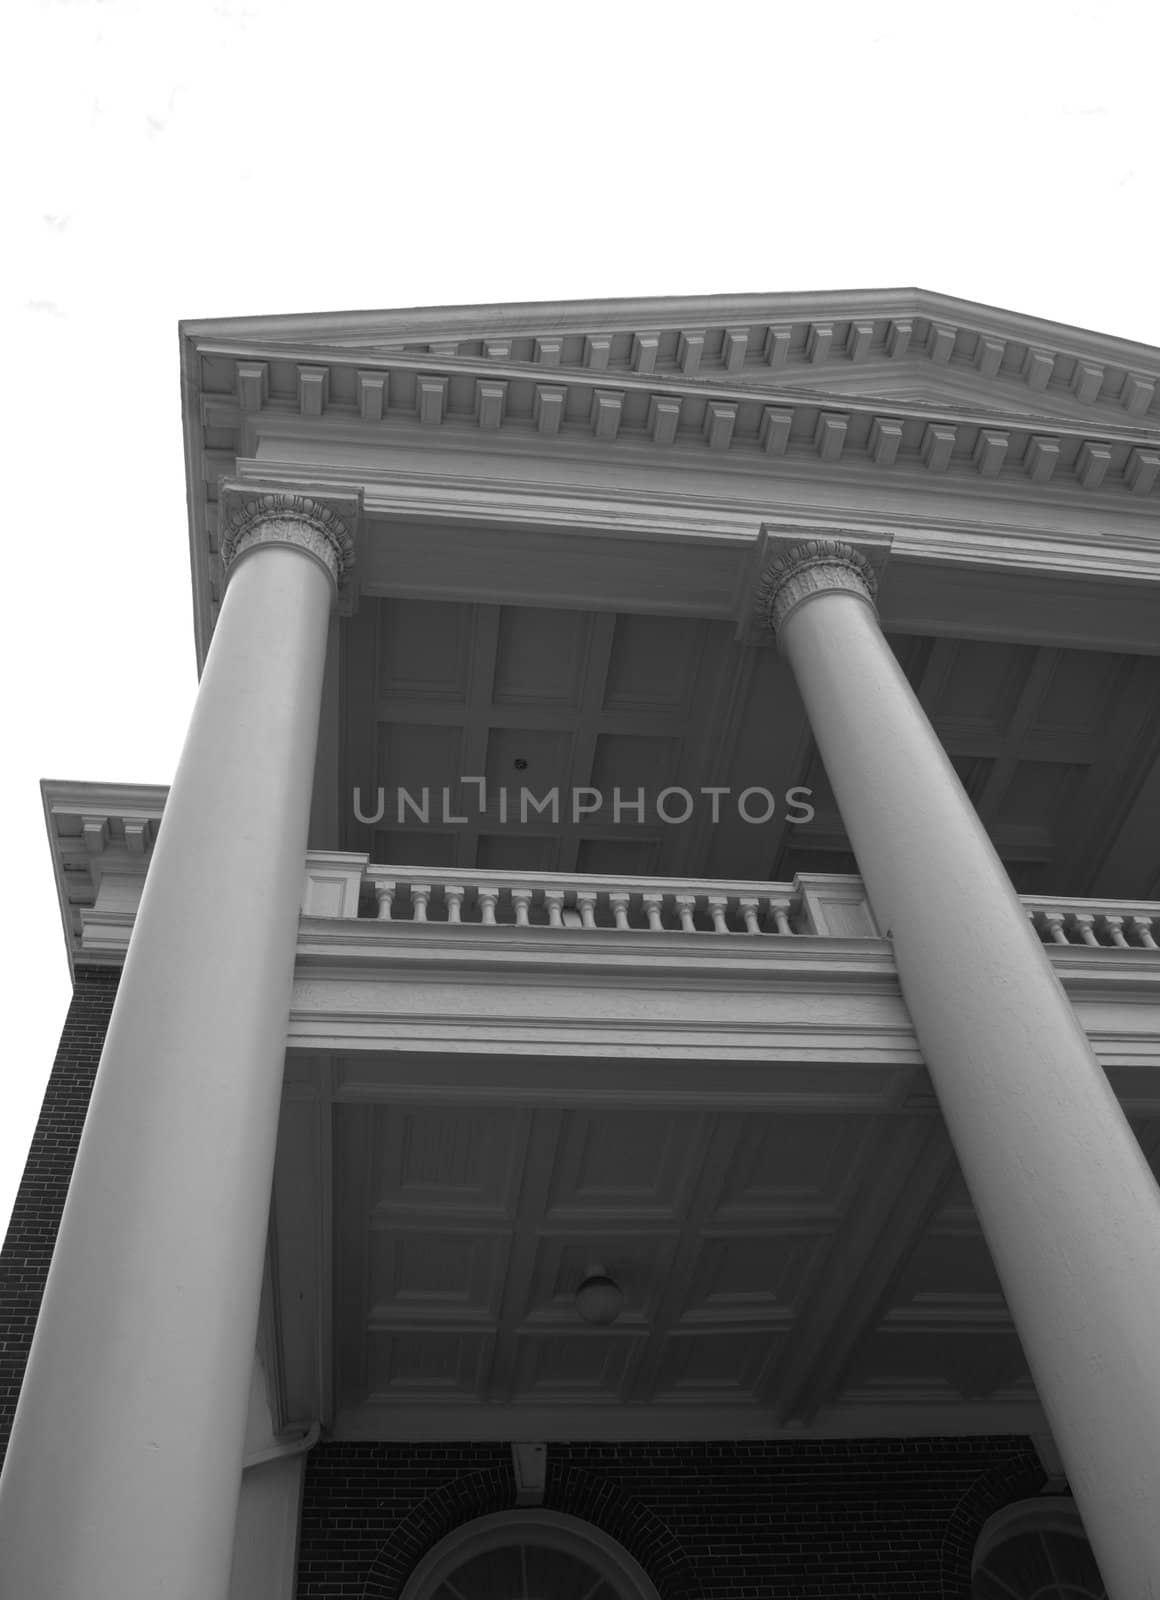 An old building in the south with tall columns shown in black and white.